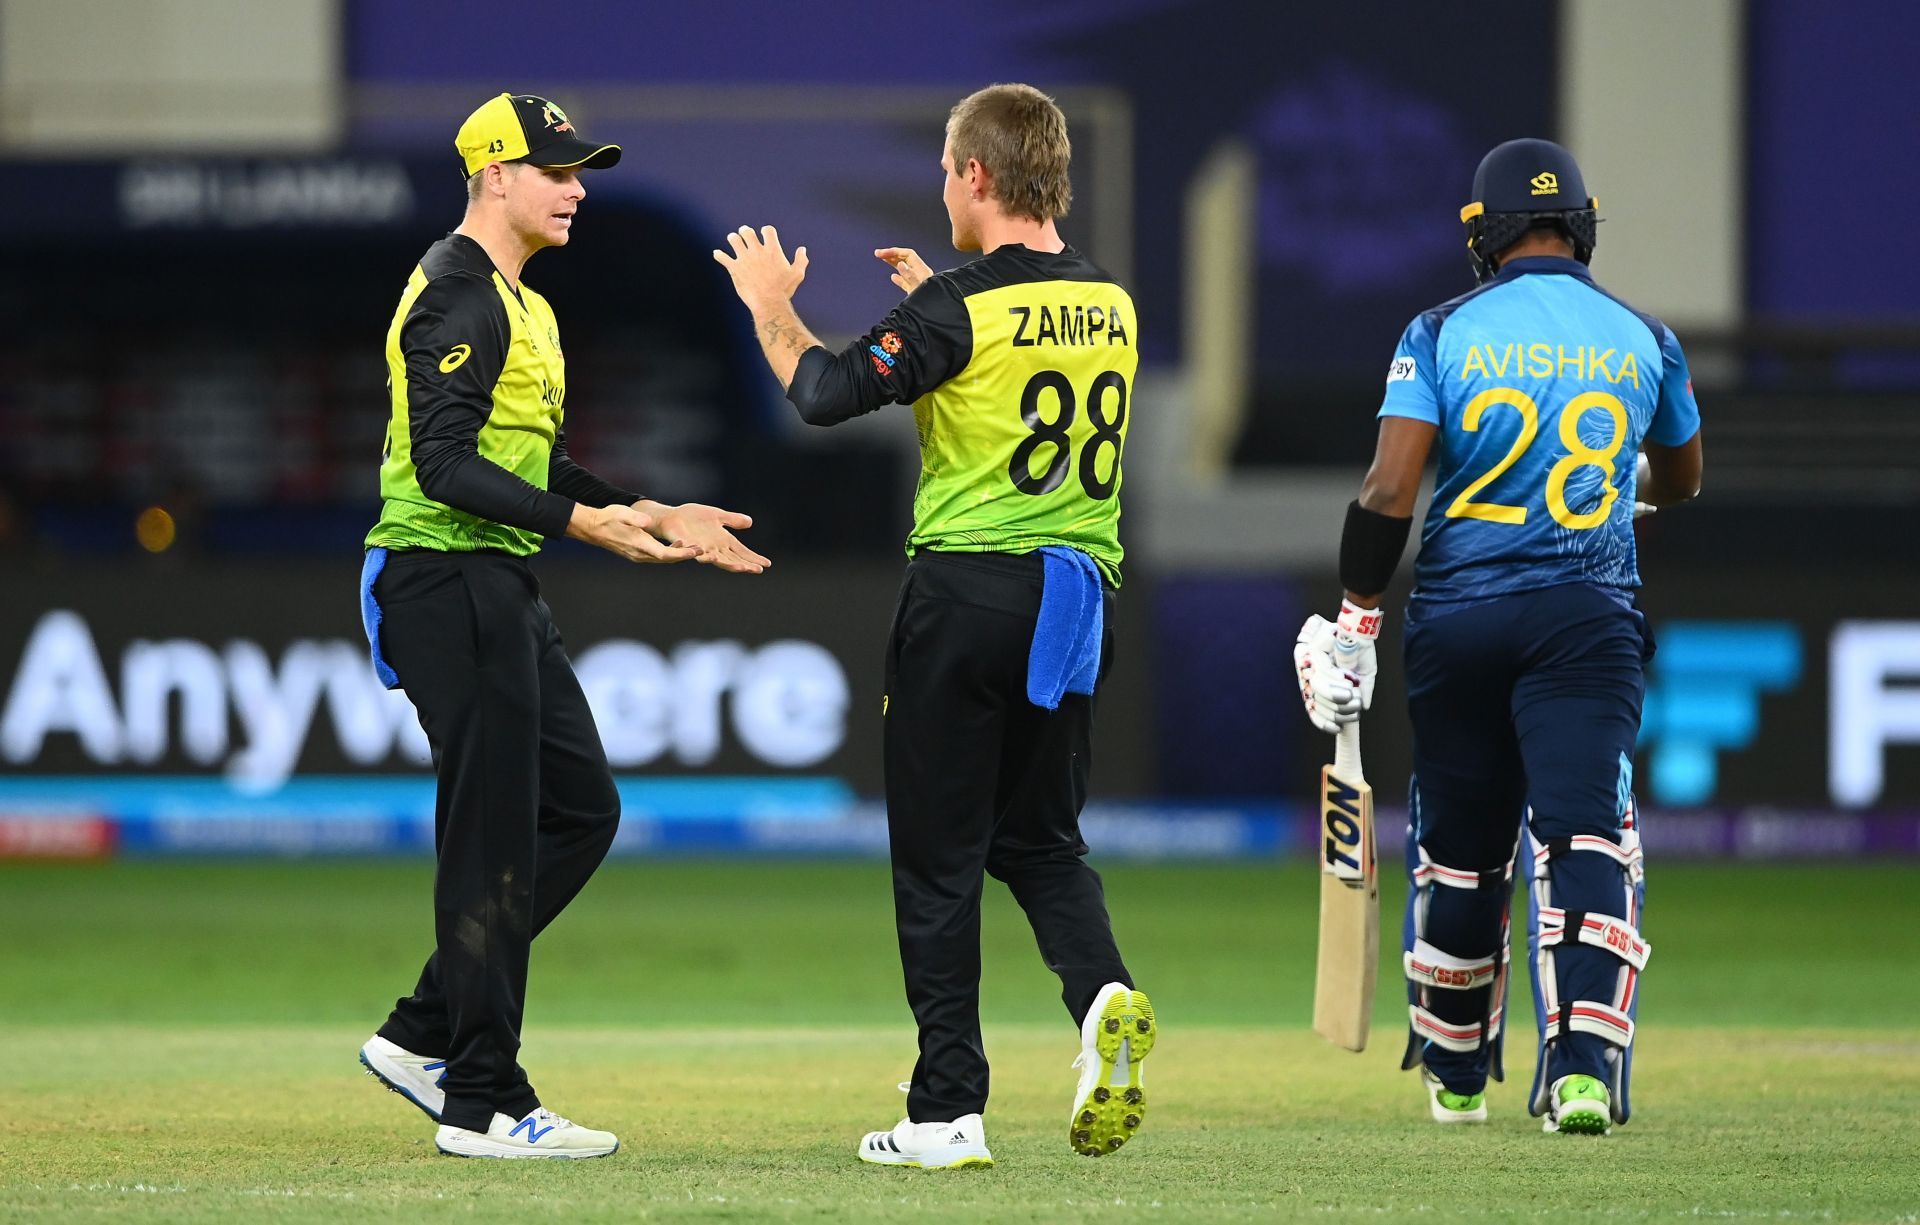 The Aussies taking on Sri Lanka during the T20 World Cup. Pic: Getty Images